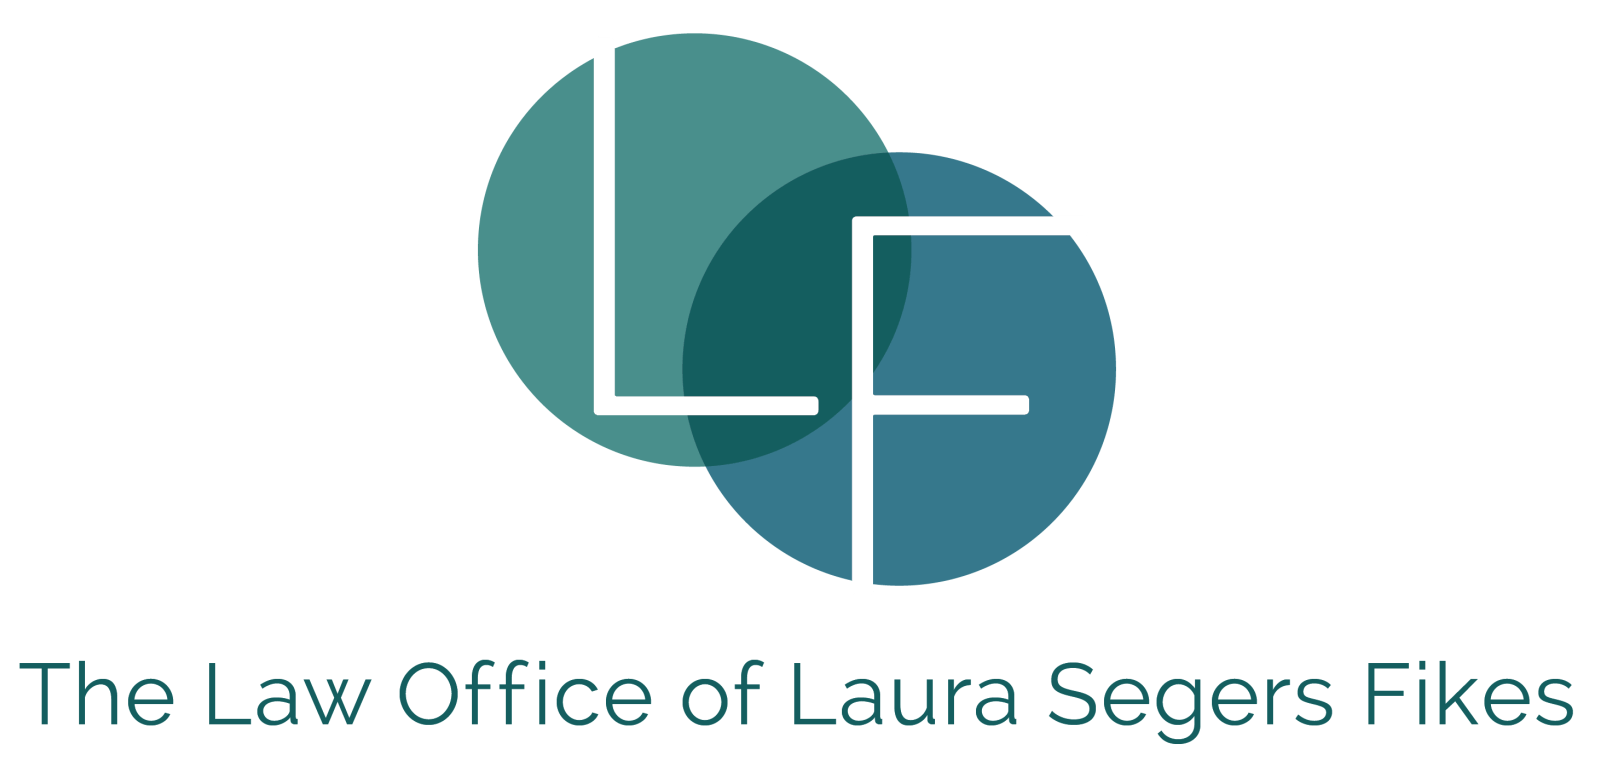 THE LAW OFFICE OF LAURA SEGERS FIKES LOGO